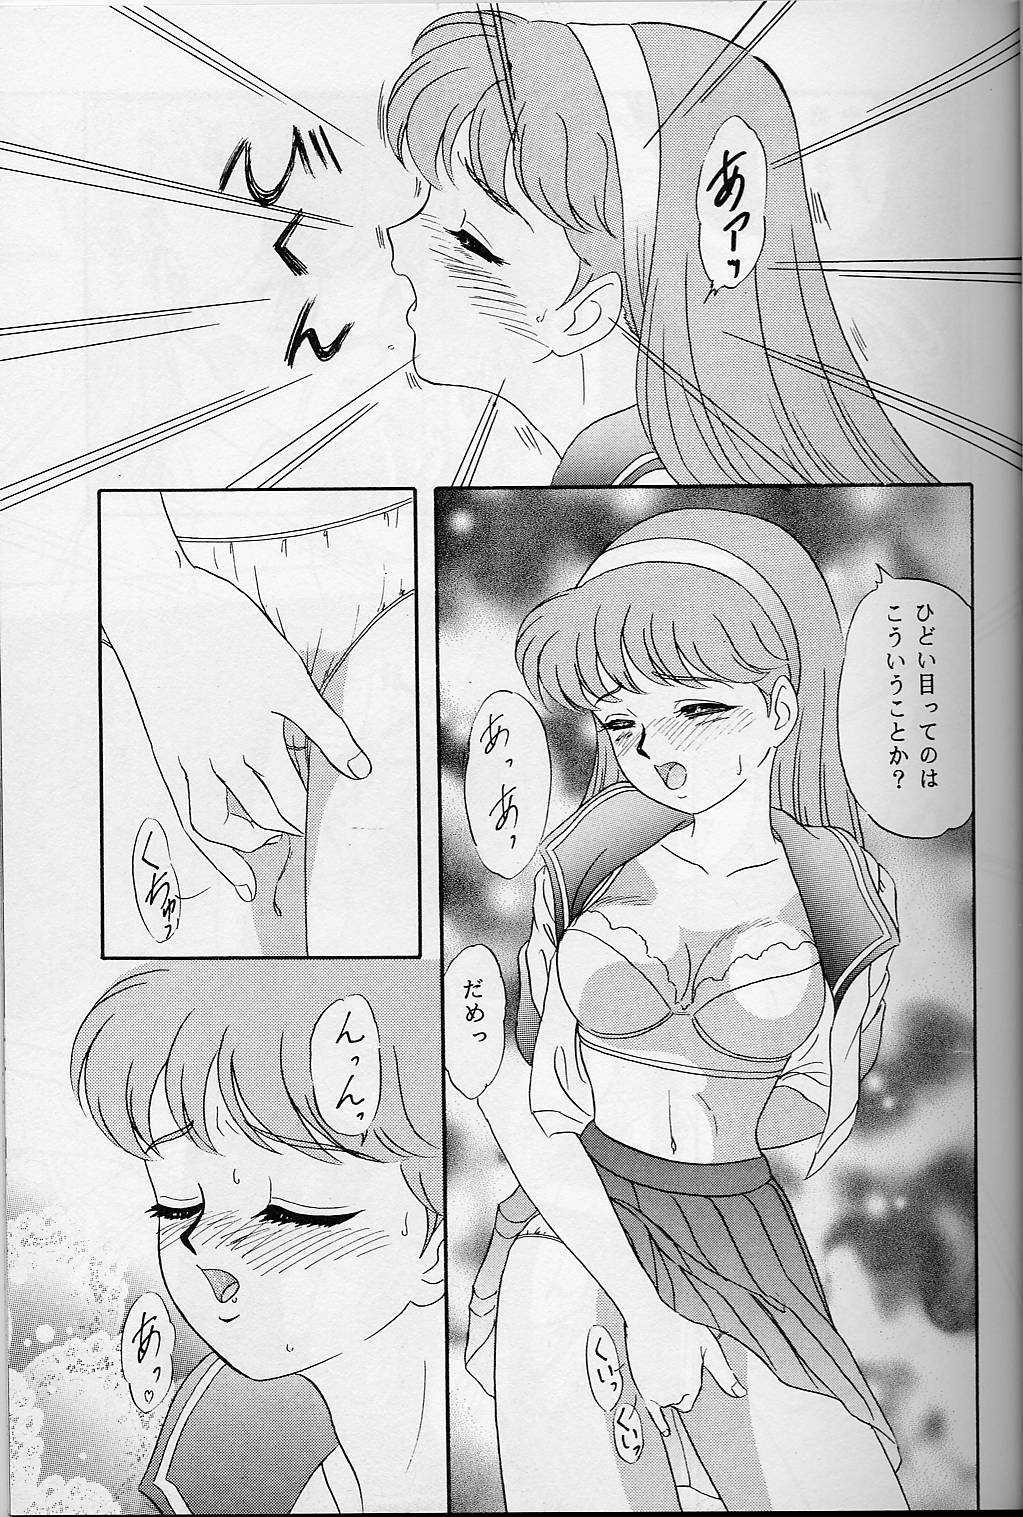 Shaved Lunch Time 5 - Tokimeki memorial Hardcore Sex - Page 8